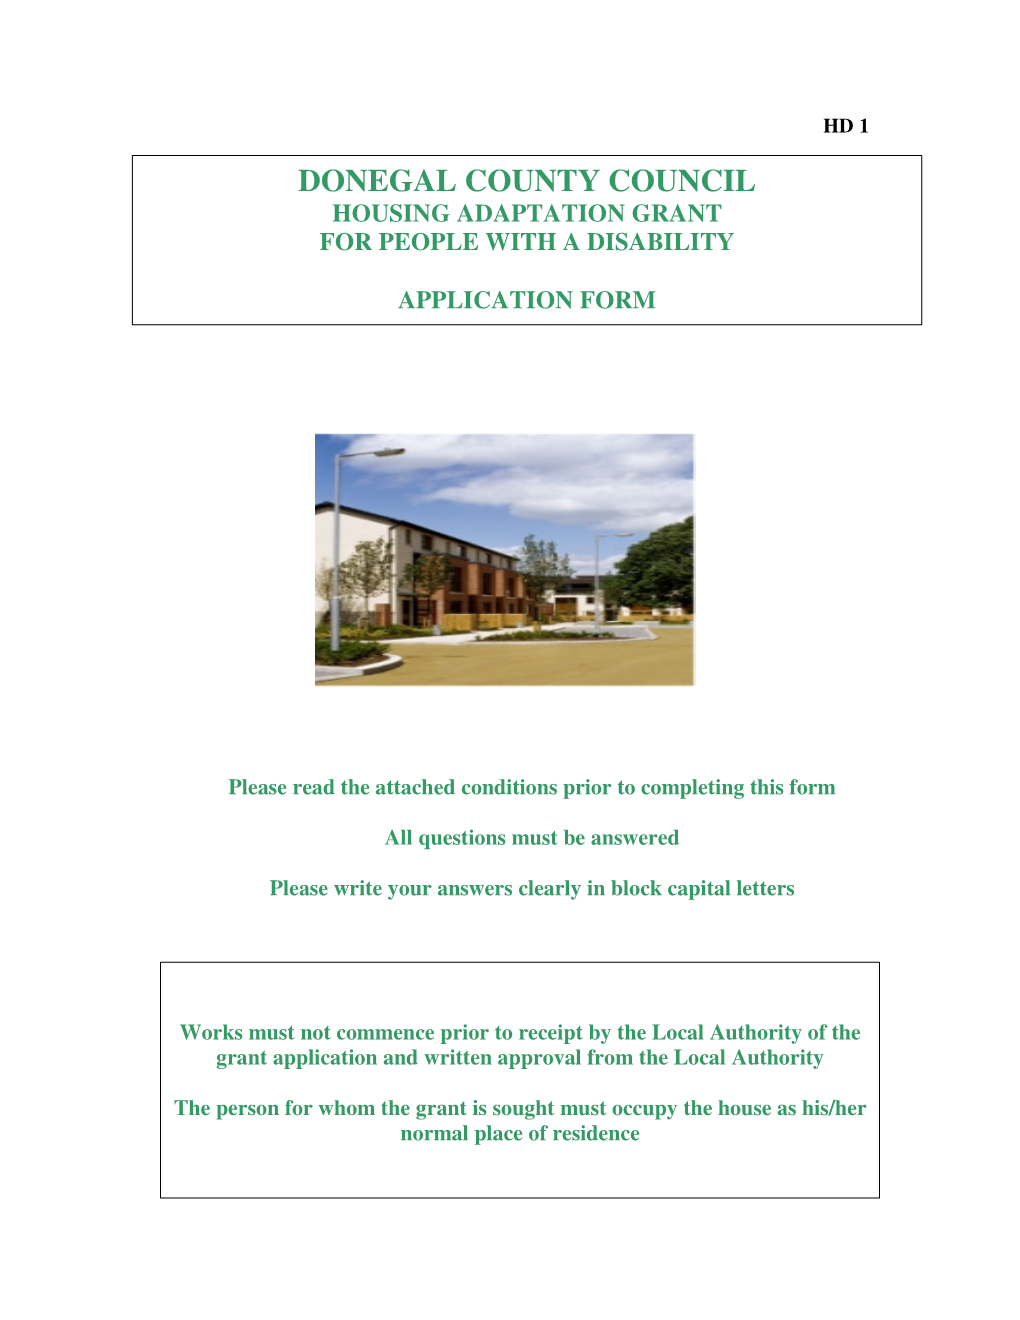 Donegal County Council Housing Adaptation Grant for People with a Disability